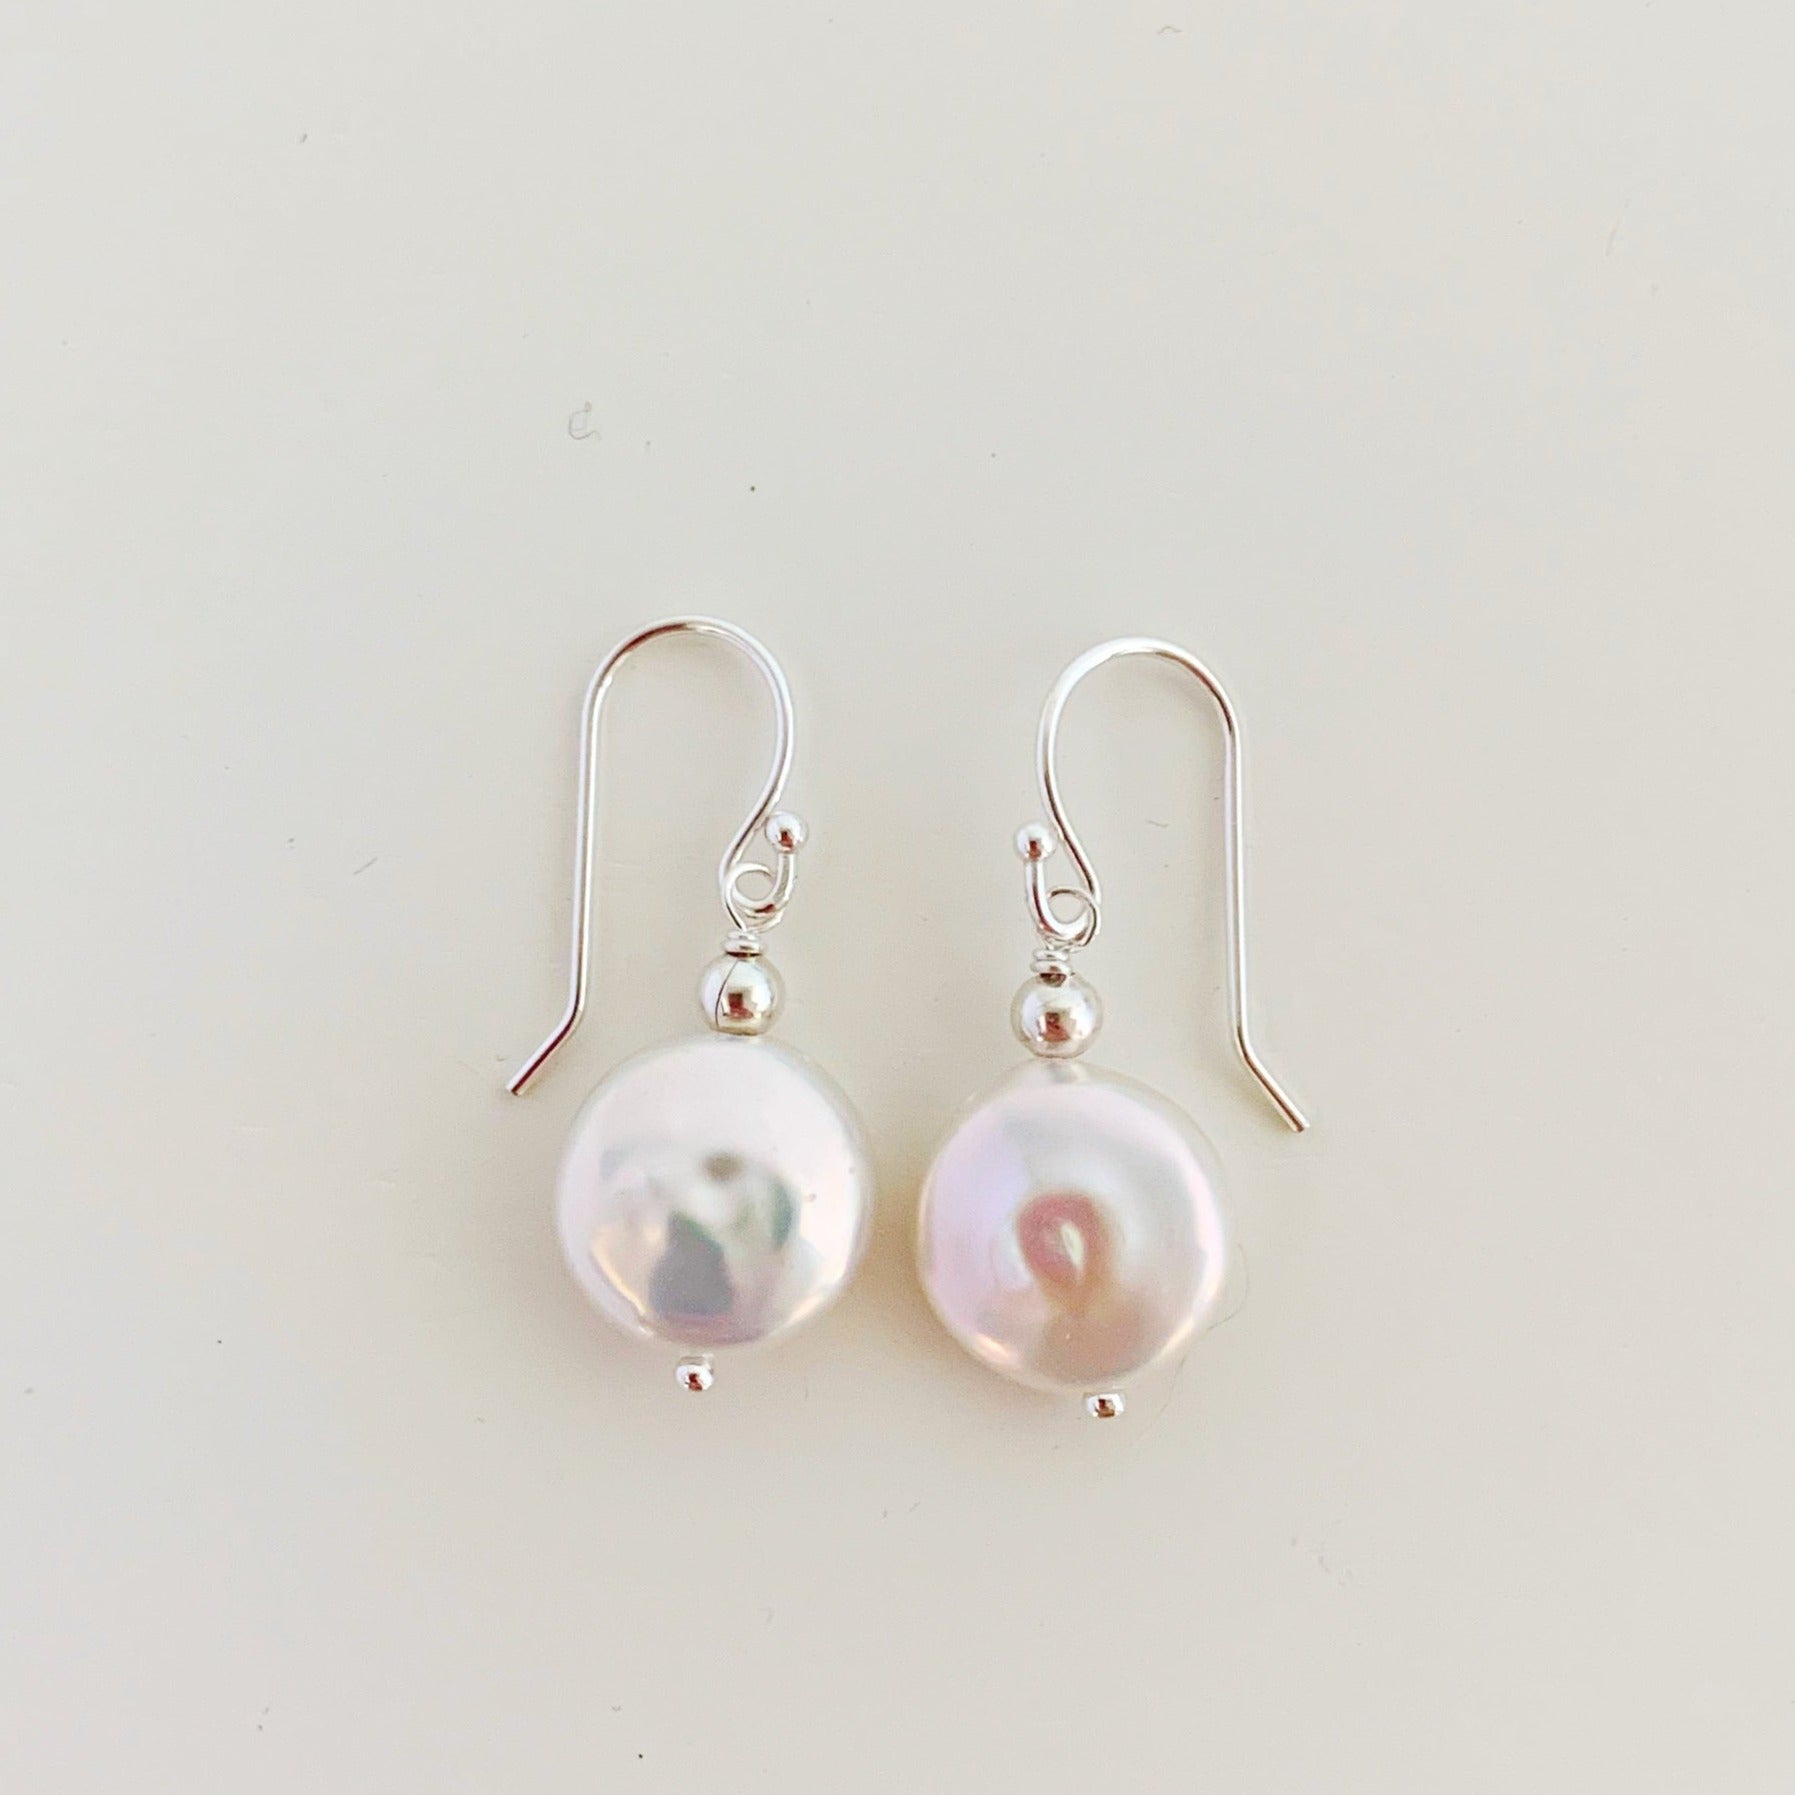 the newport earrings by mermaids and madeleines are a simple style earring designed with white, freshwater coin pearls and sterling silver findings and beads. this pair is photographed flat on a white surface